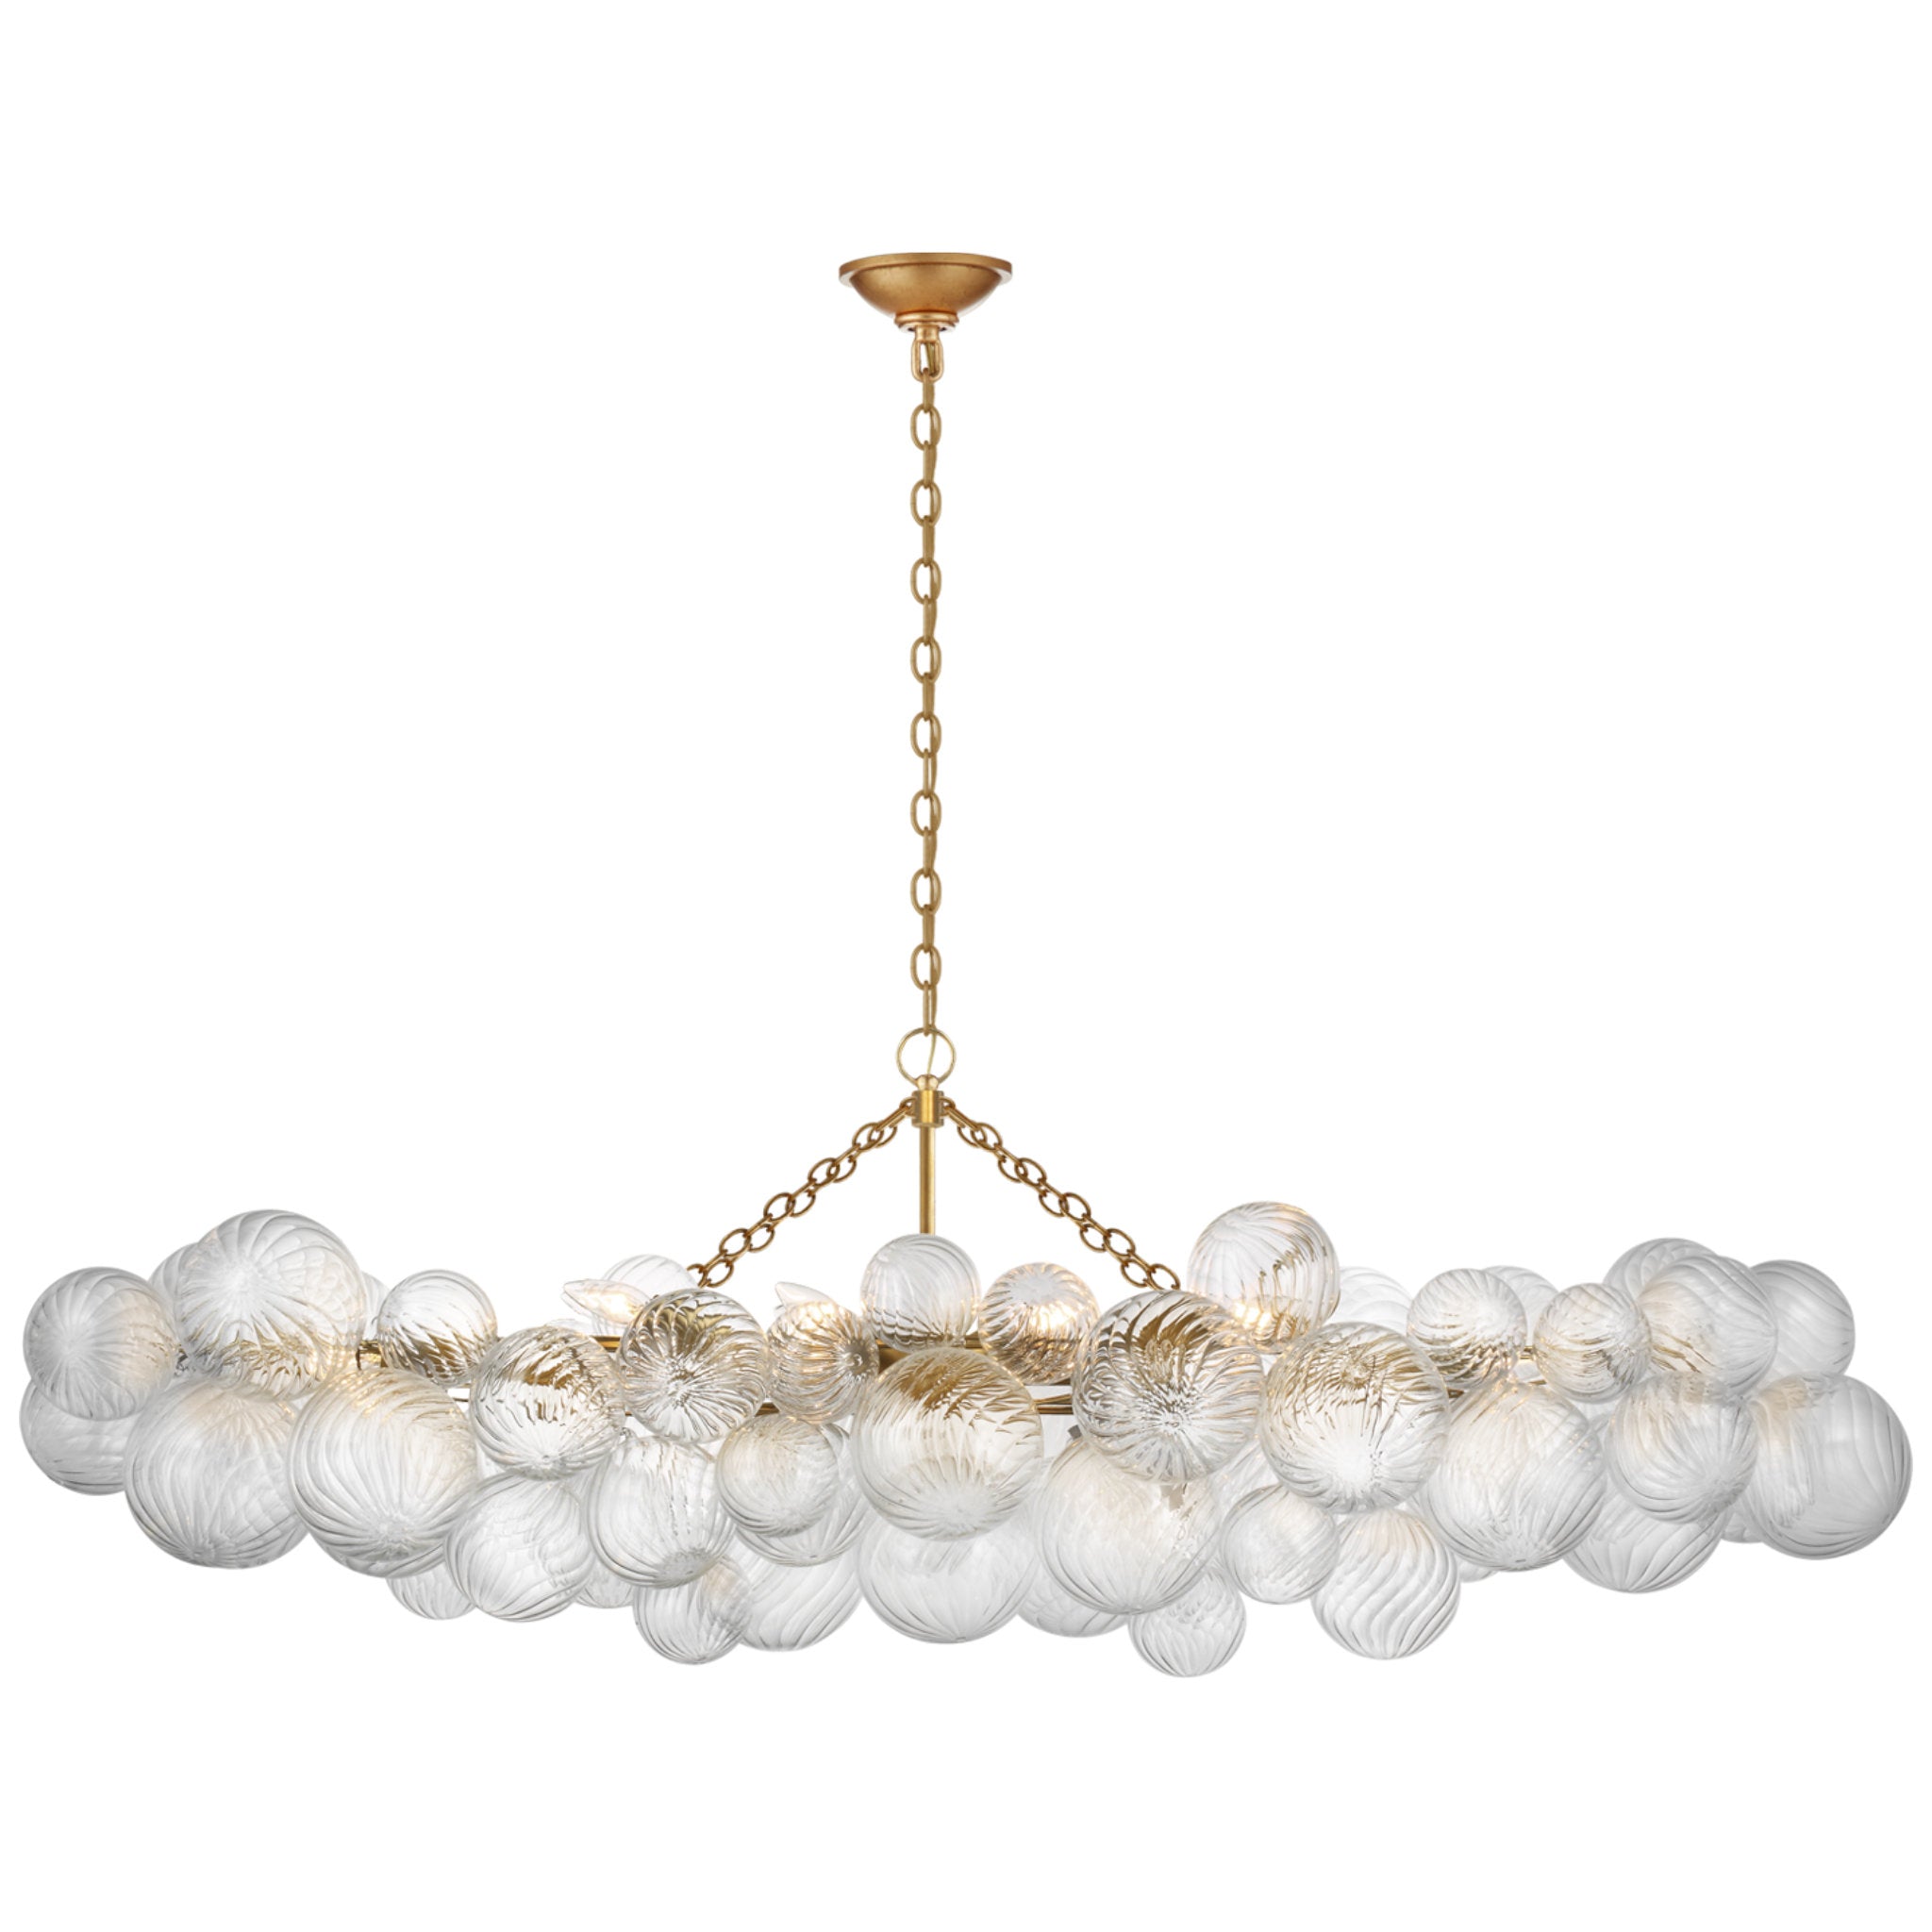 Julie Neill Talia Large Linear Chandelier in Gild with Clear Swirled Glass